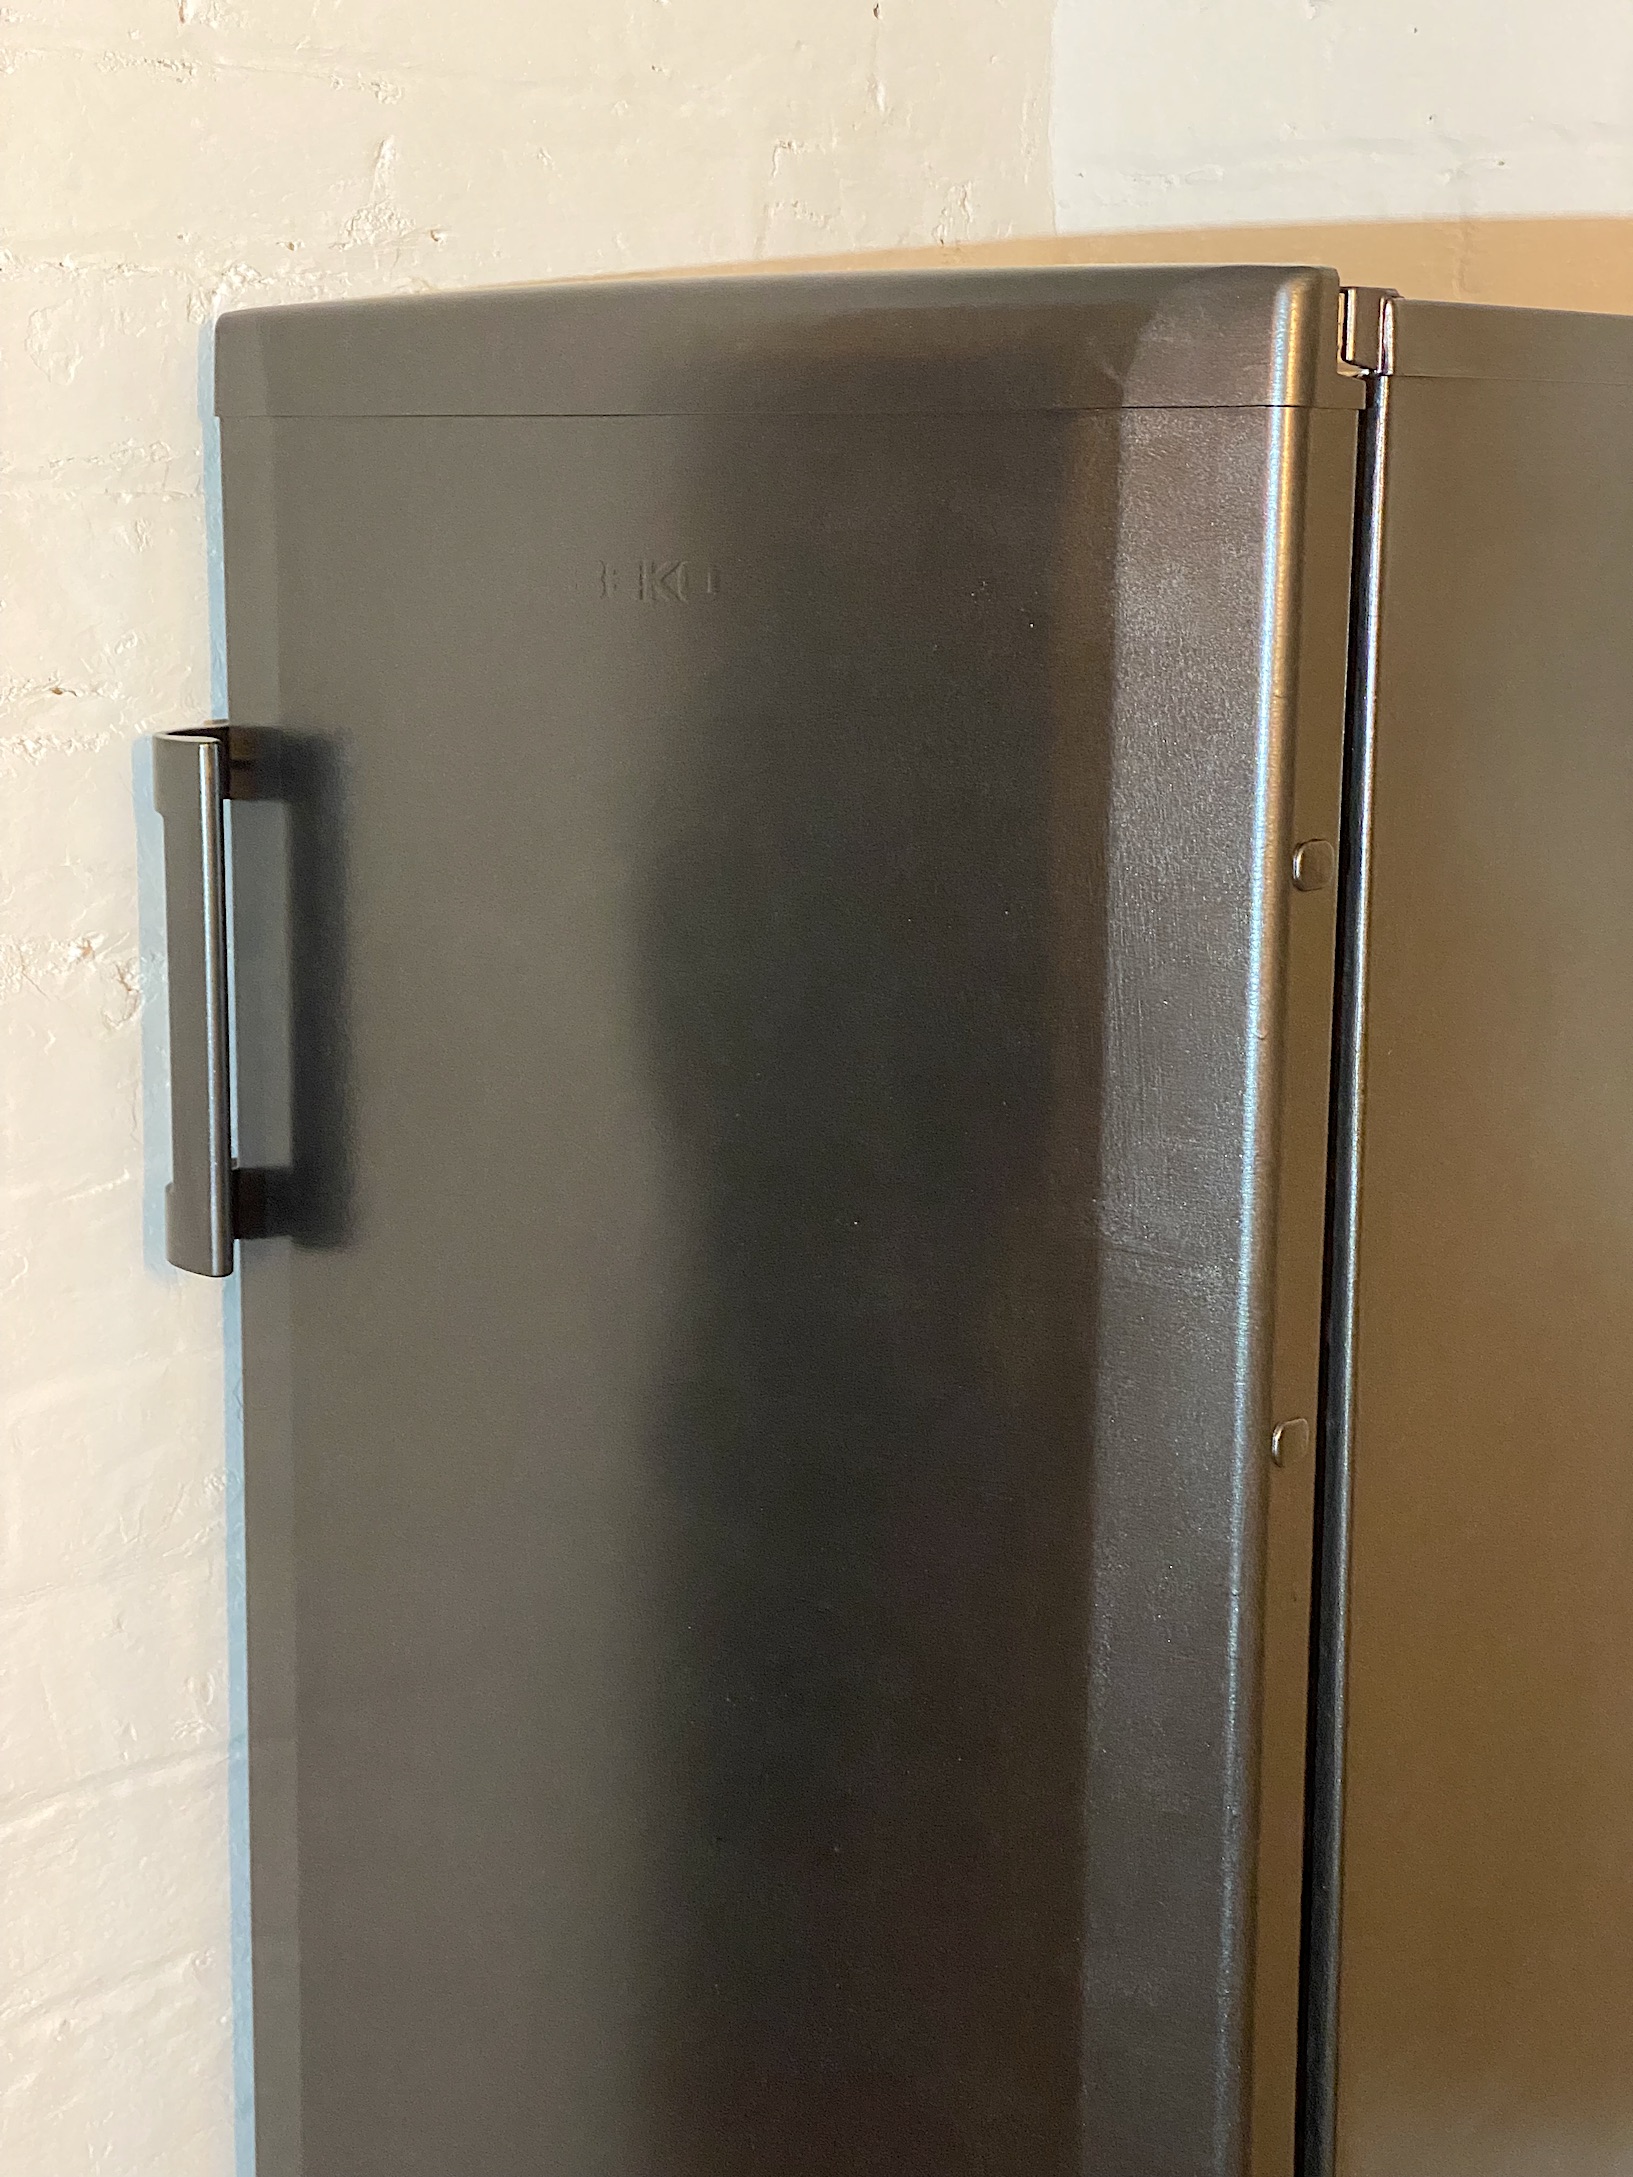 V33 Renovation Appliance & Radiator paint in carbon black review